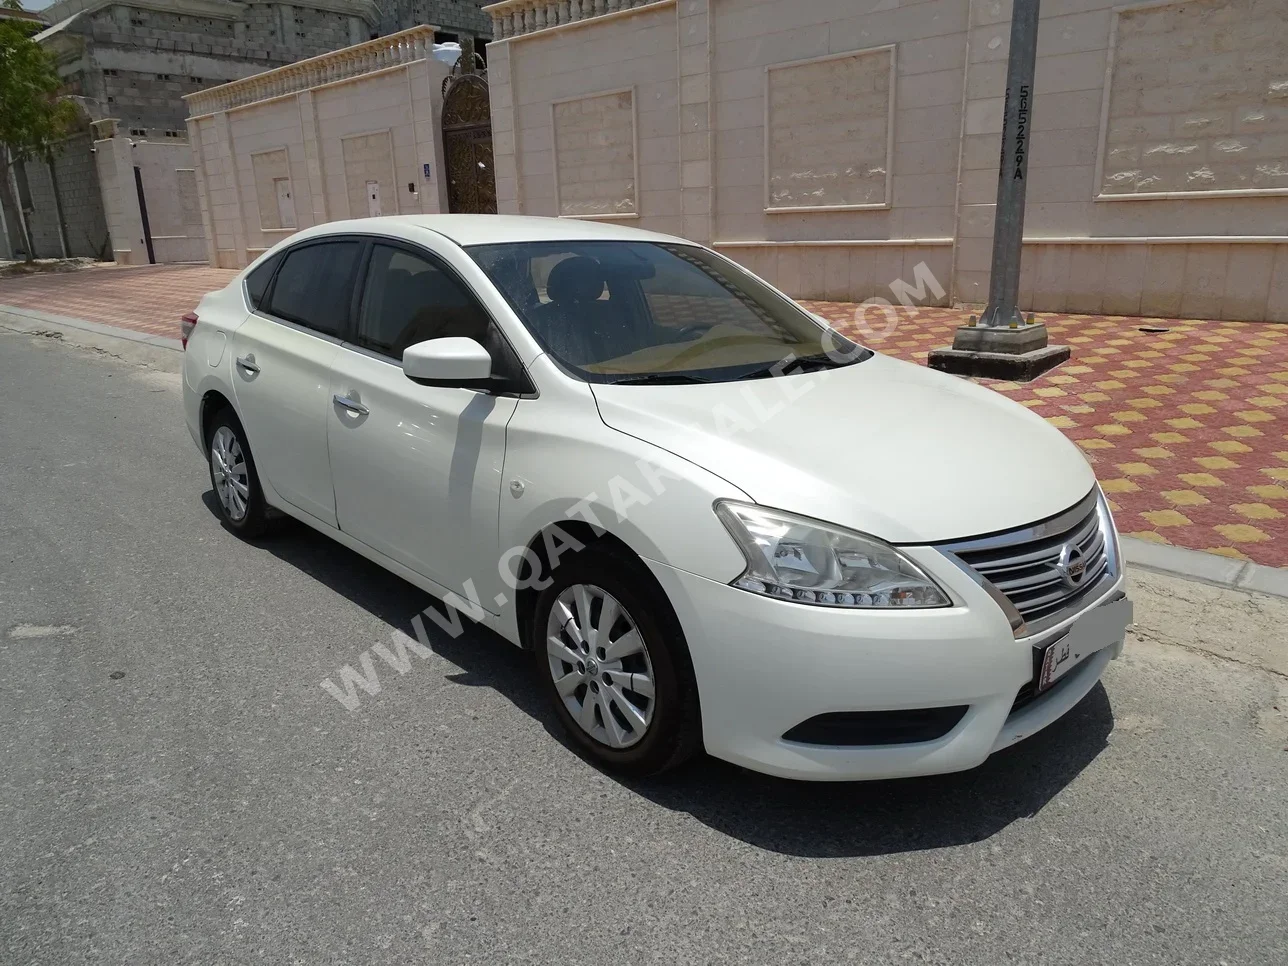 Nissan  Sentra  2017  Automatic  69,000 Km  4 Cylinder  Front Wheel Drive (FWD)  Sedan  White